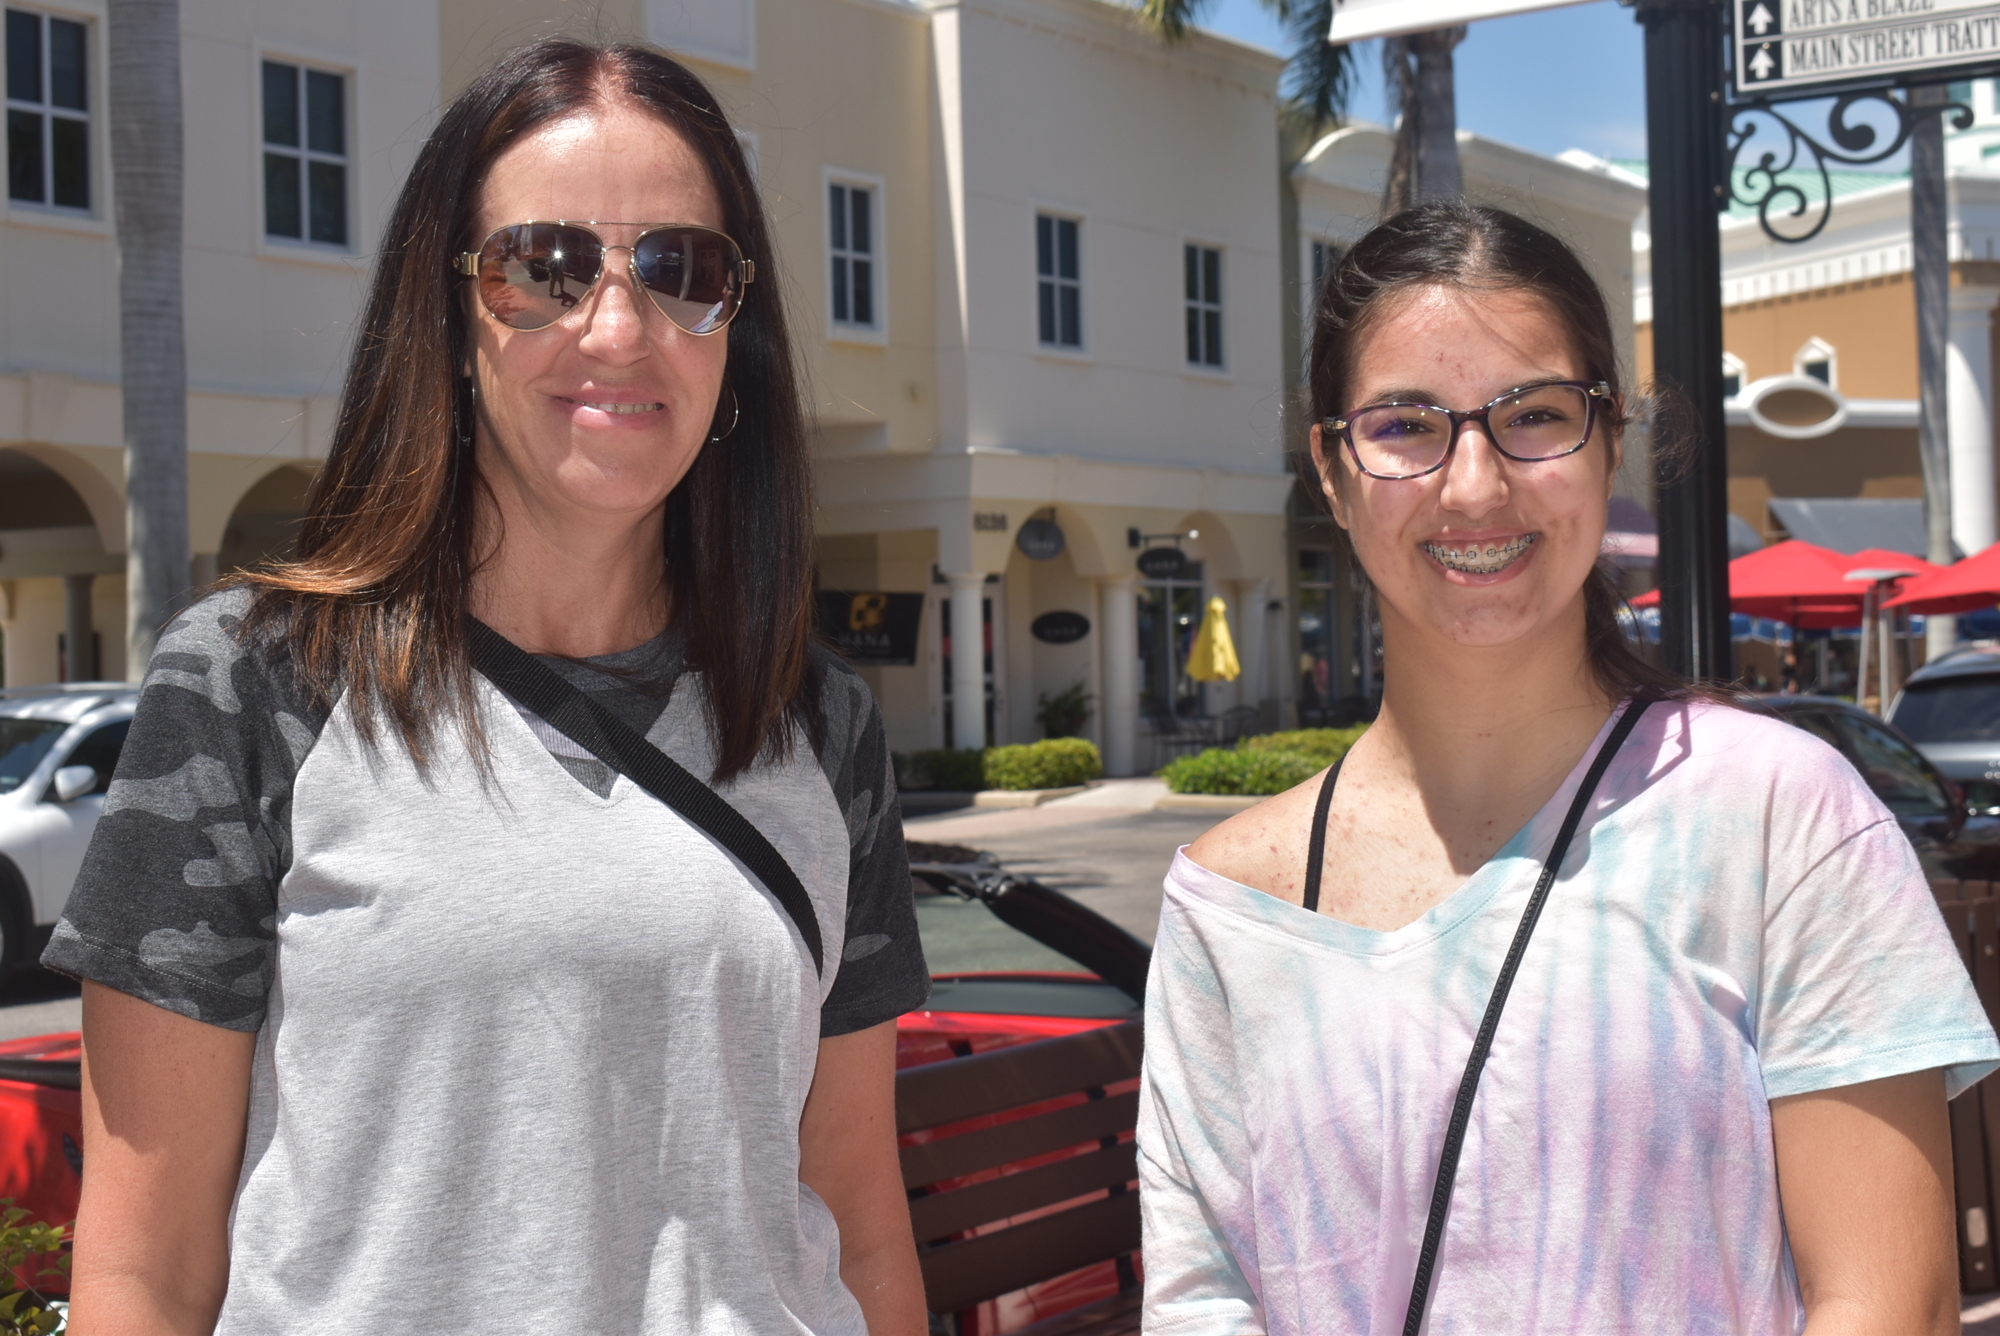 Deena and Caprey King, who live off Lakewood Ranch Boulevard, don't plan to get vaccinated in the near future. Deena had COVID-19 in July and said she prefers to let antobodies protect her.